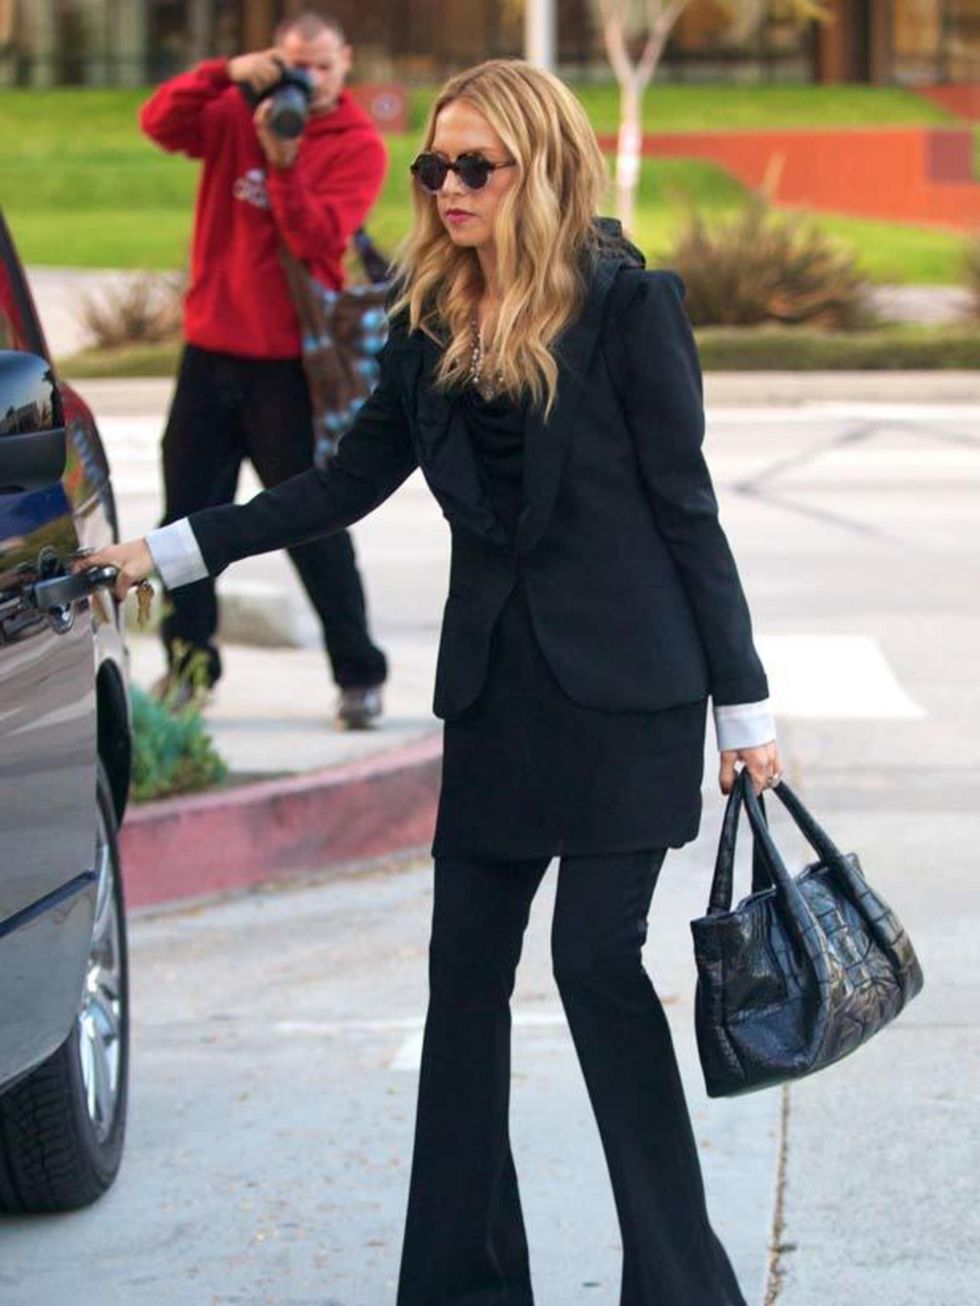 <p><a href="http://www.elleuk.com/content/search?SearchText=rachel+zoe&amp;SearchButton=Search">Rachel Zoe</a> wears a suit from her own collection out &amp; about in LA, November 2011</p>